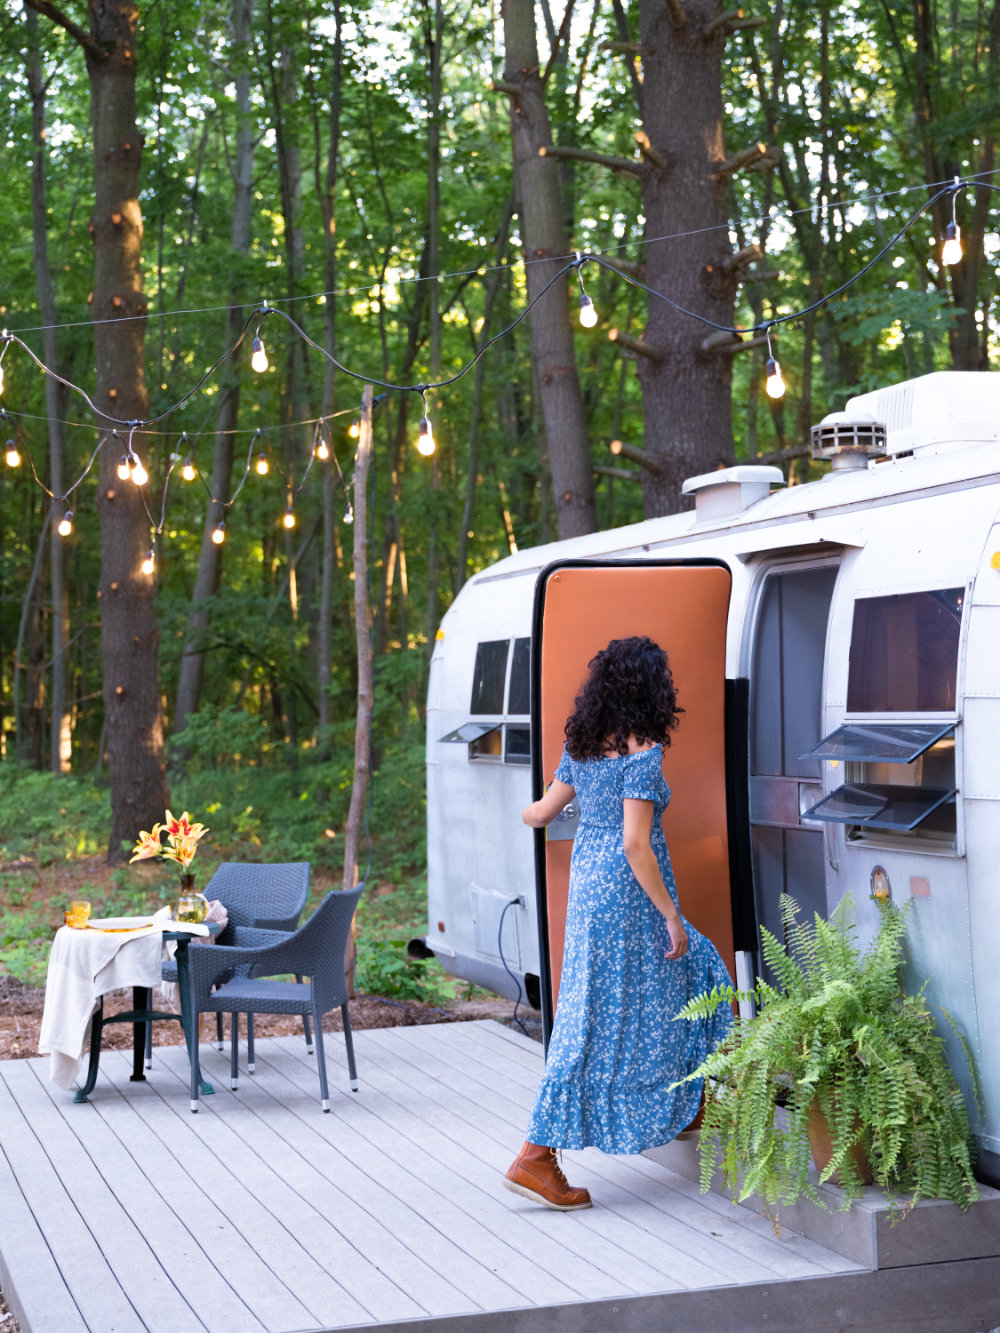 Luxury Vintage Glampers Come to Goldberry Woods!